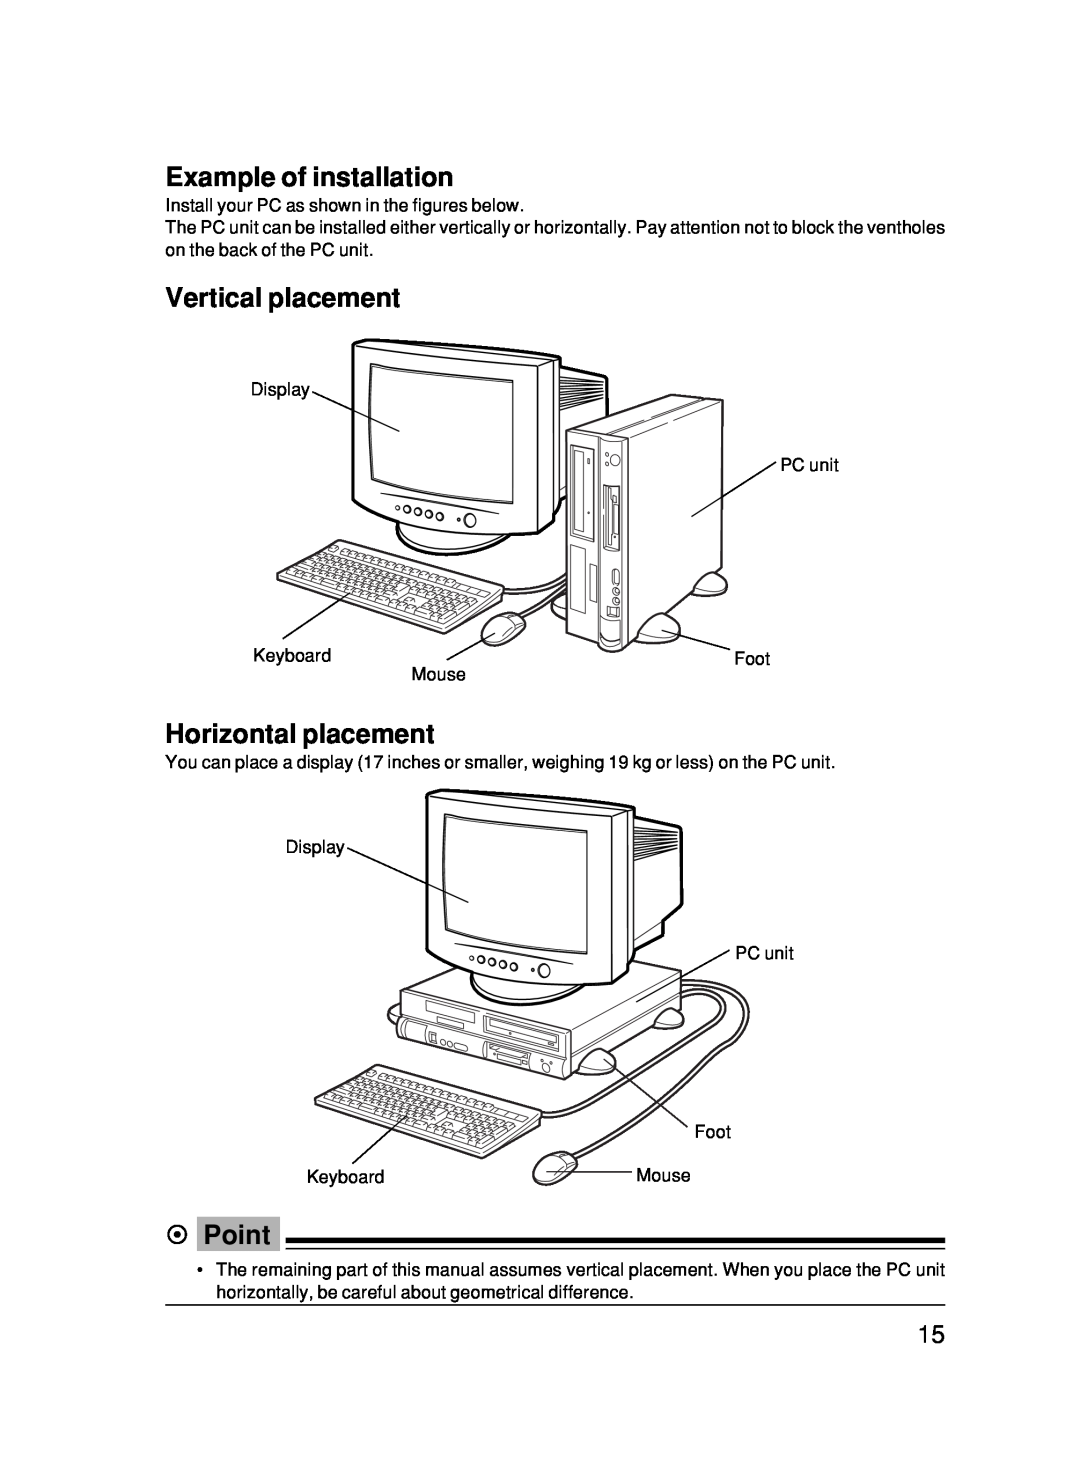 Fujitsu 500 user manual Example of installation, Vertical placement, Horizontal placement, Point 